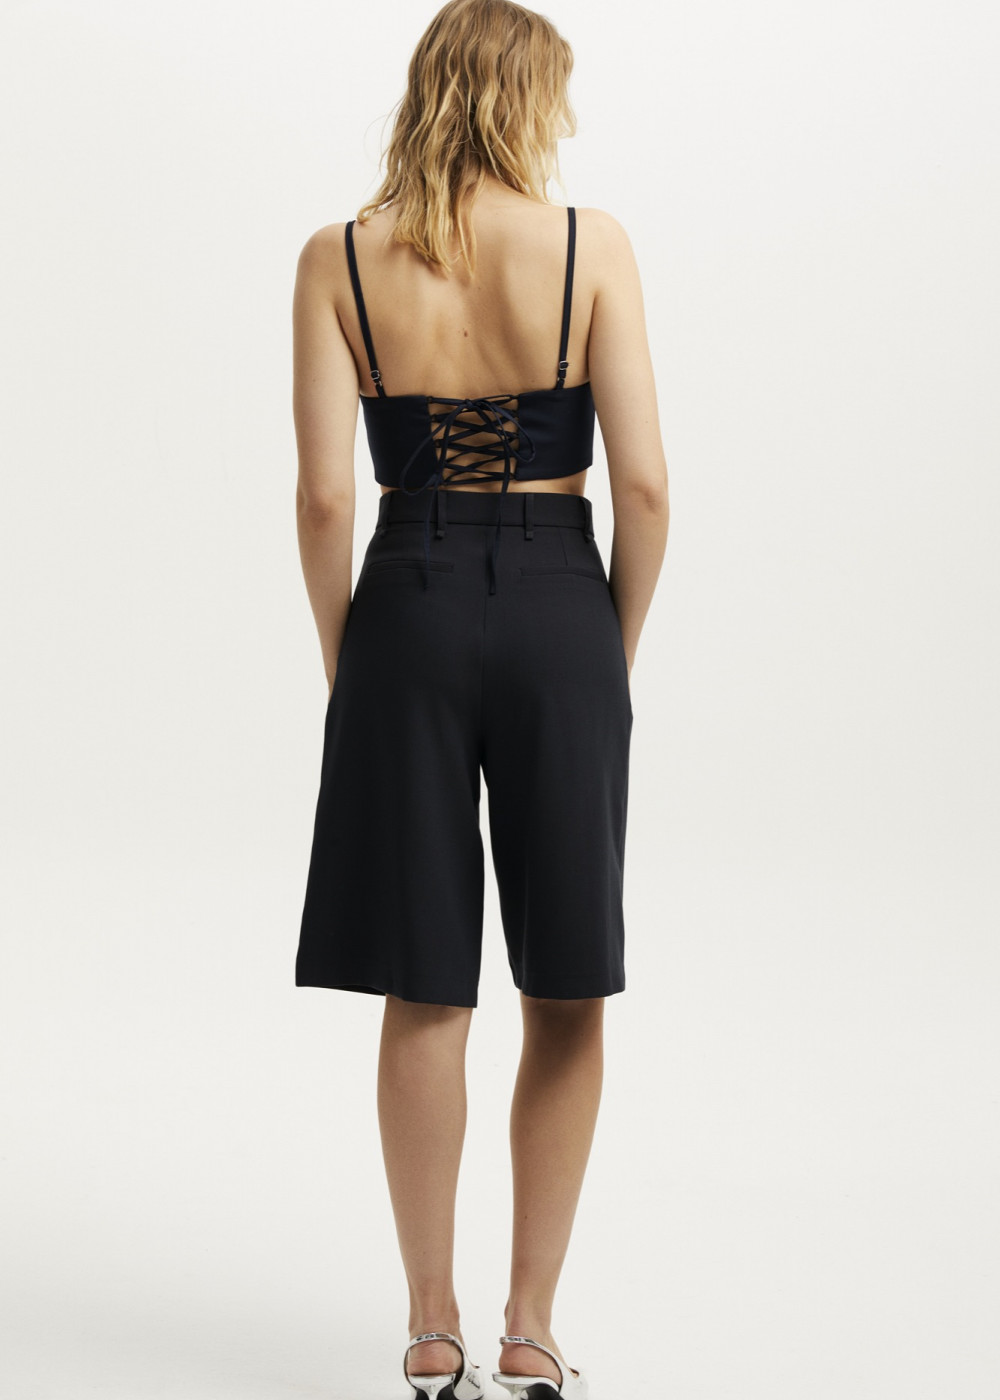 Decollar Bustier With Back